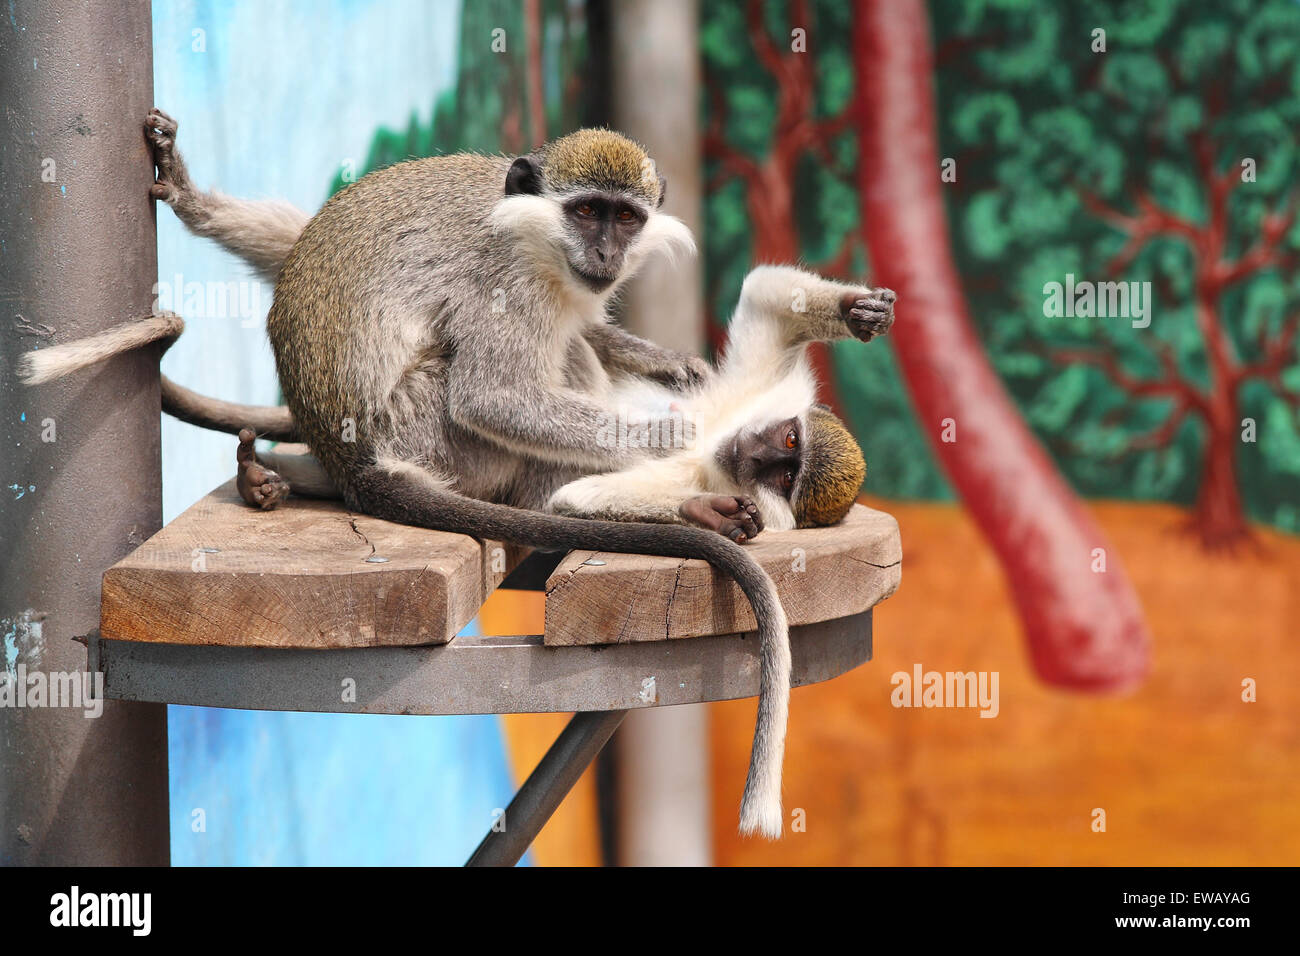 Two monkeys in a zoo comb out fleas. On a motley background. Stock Photo